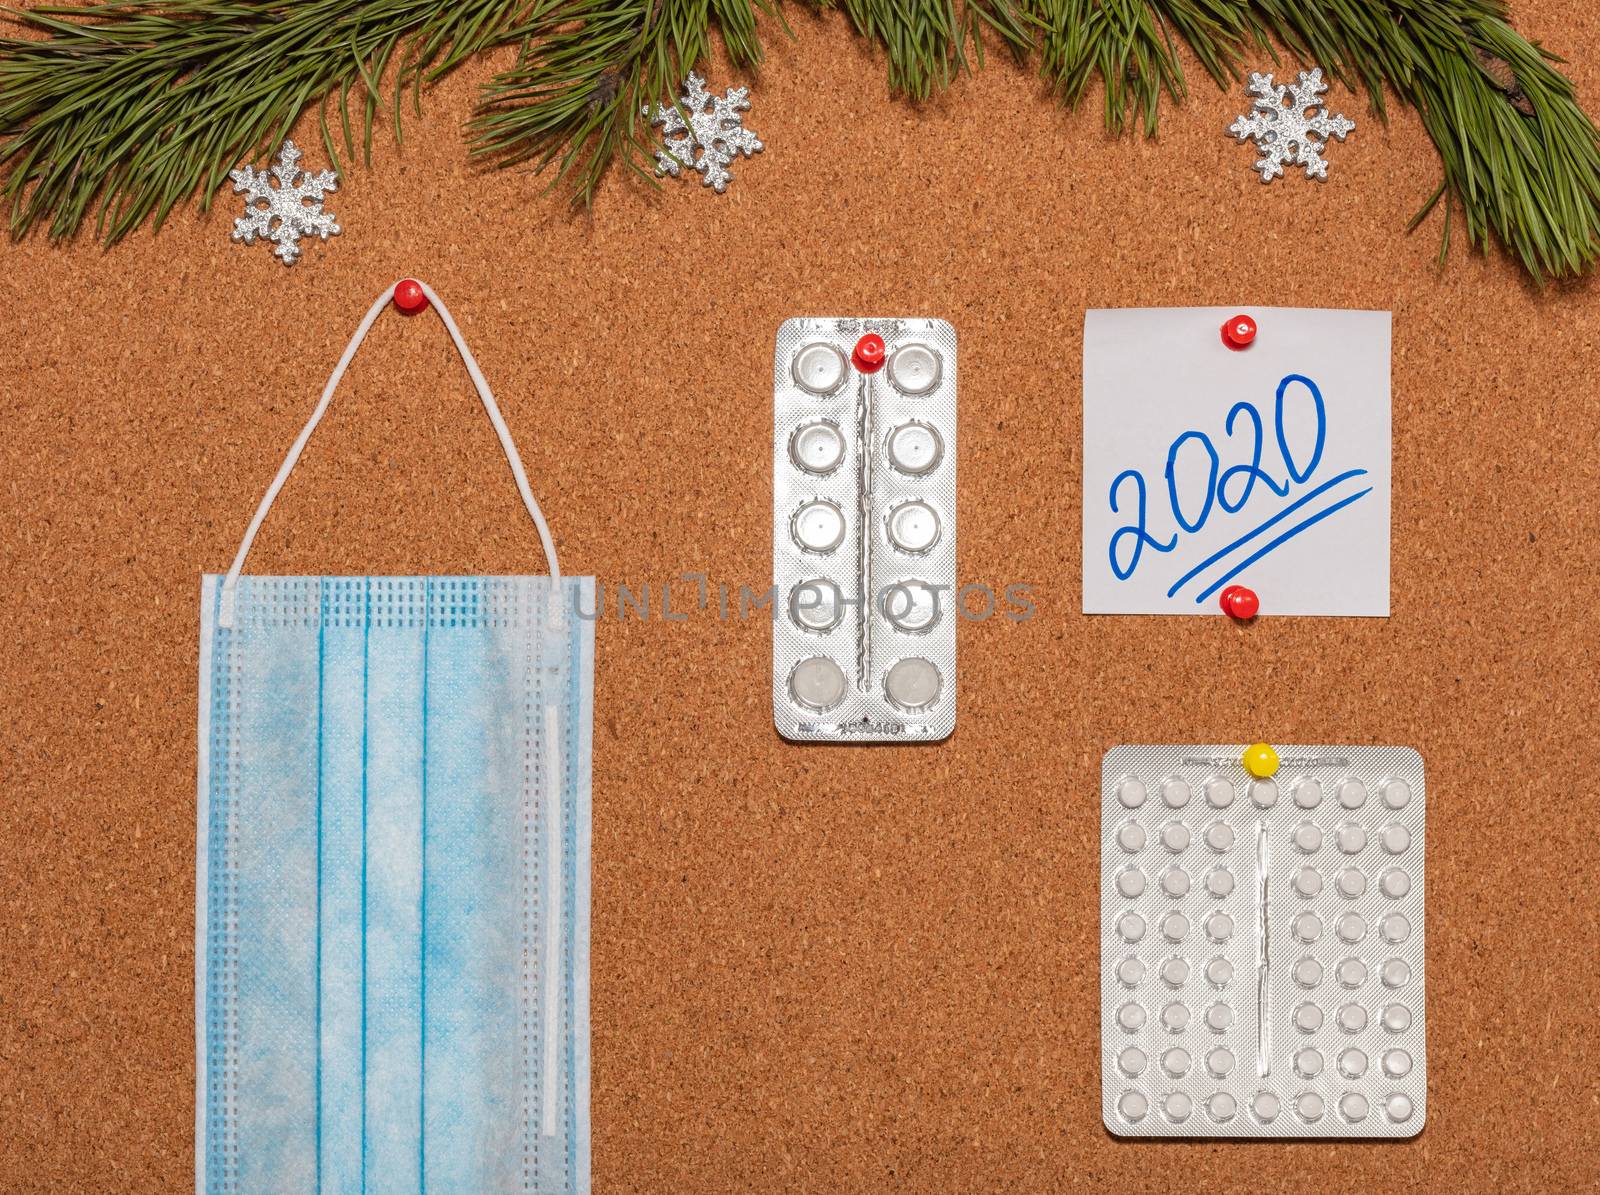 Medical mask, white pills, white sticky note with 2020 pinned on notice board which is decorated with pine twigs and snowflakes. Healthcare, christmas, new years celebration, new normal concepts.